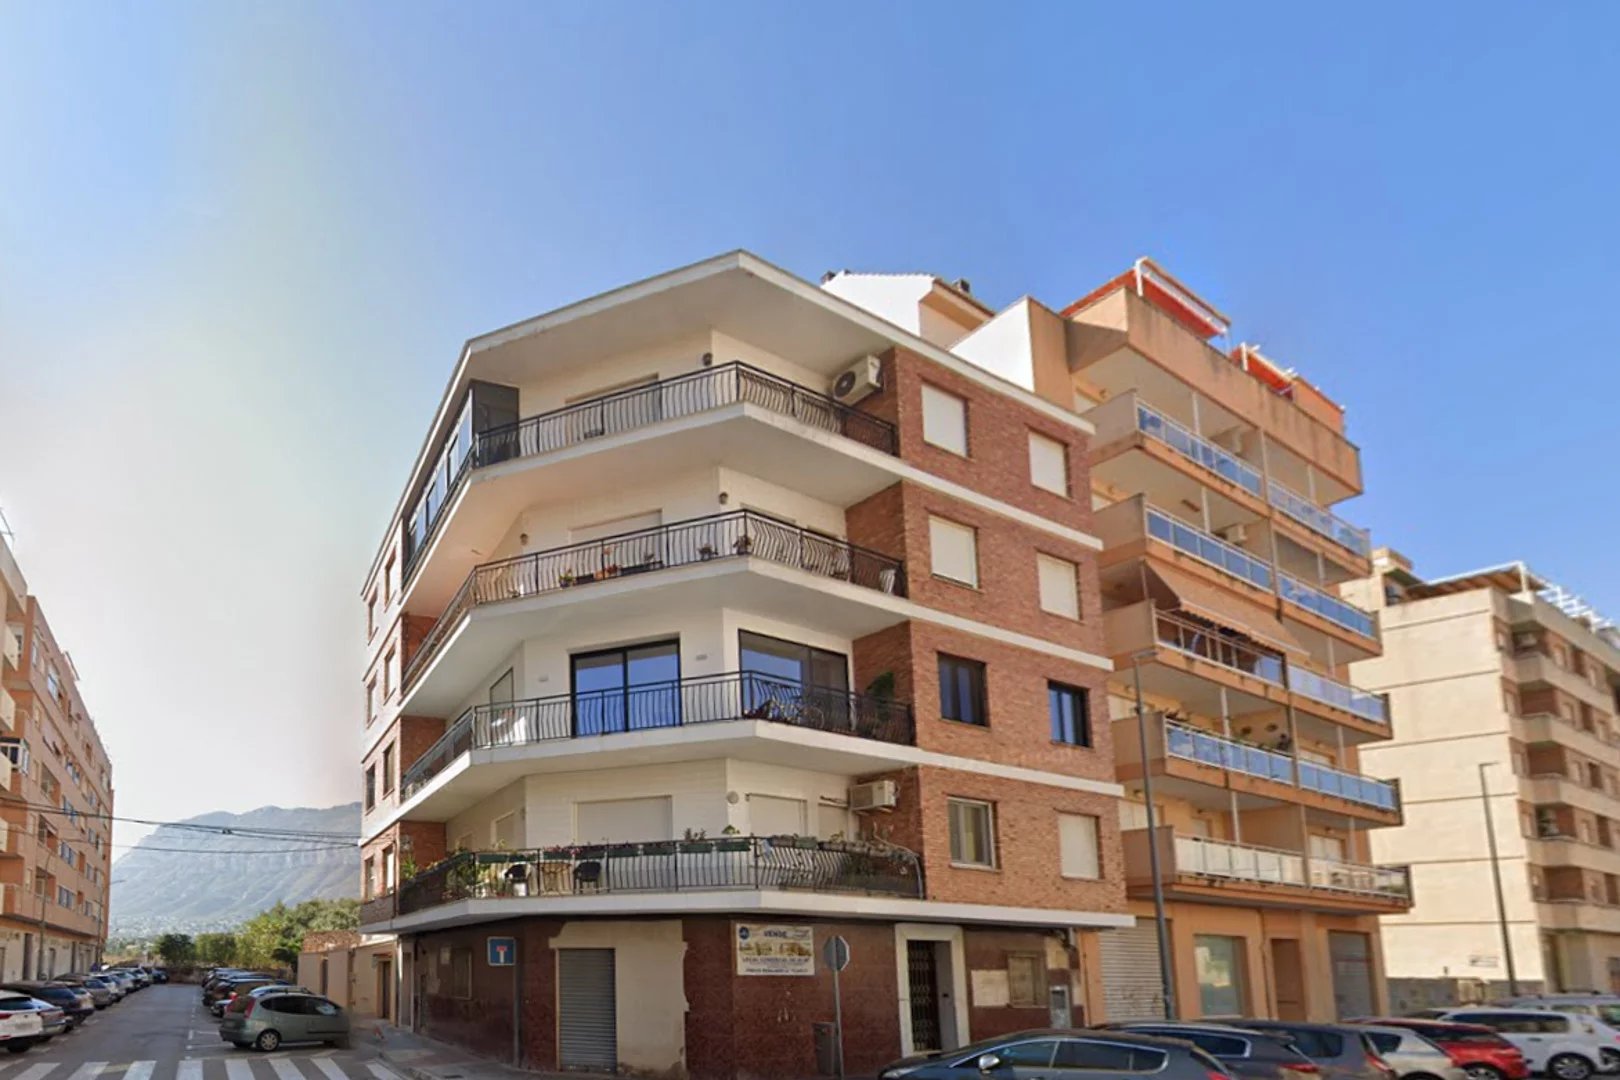 Renovated apartment in the center of Dénia for sale.